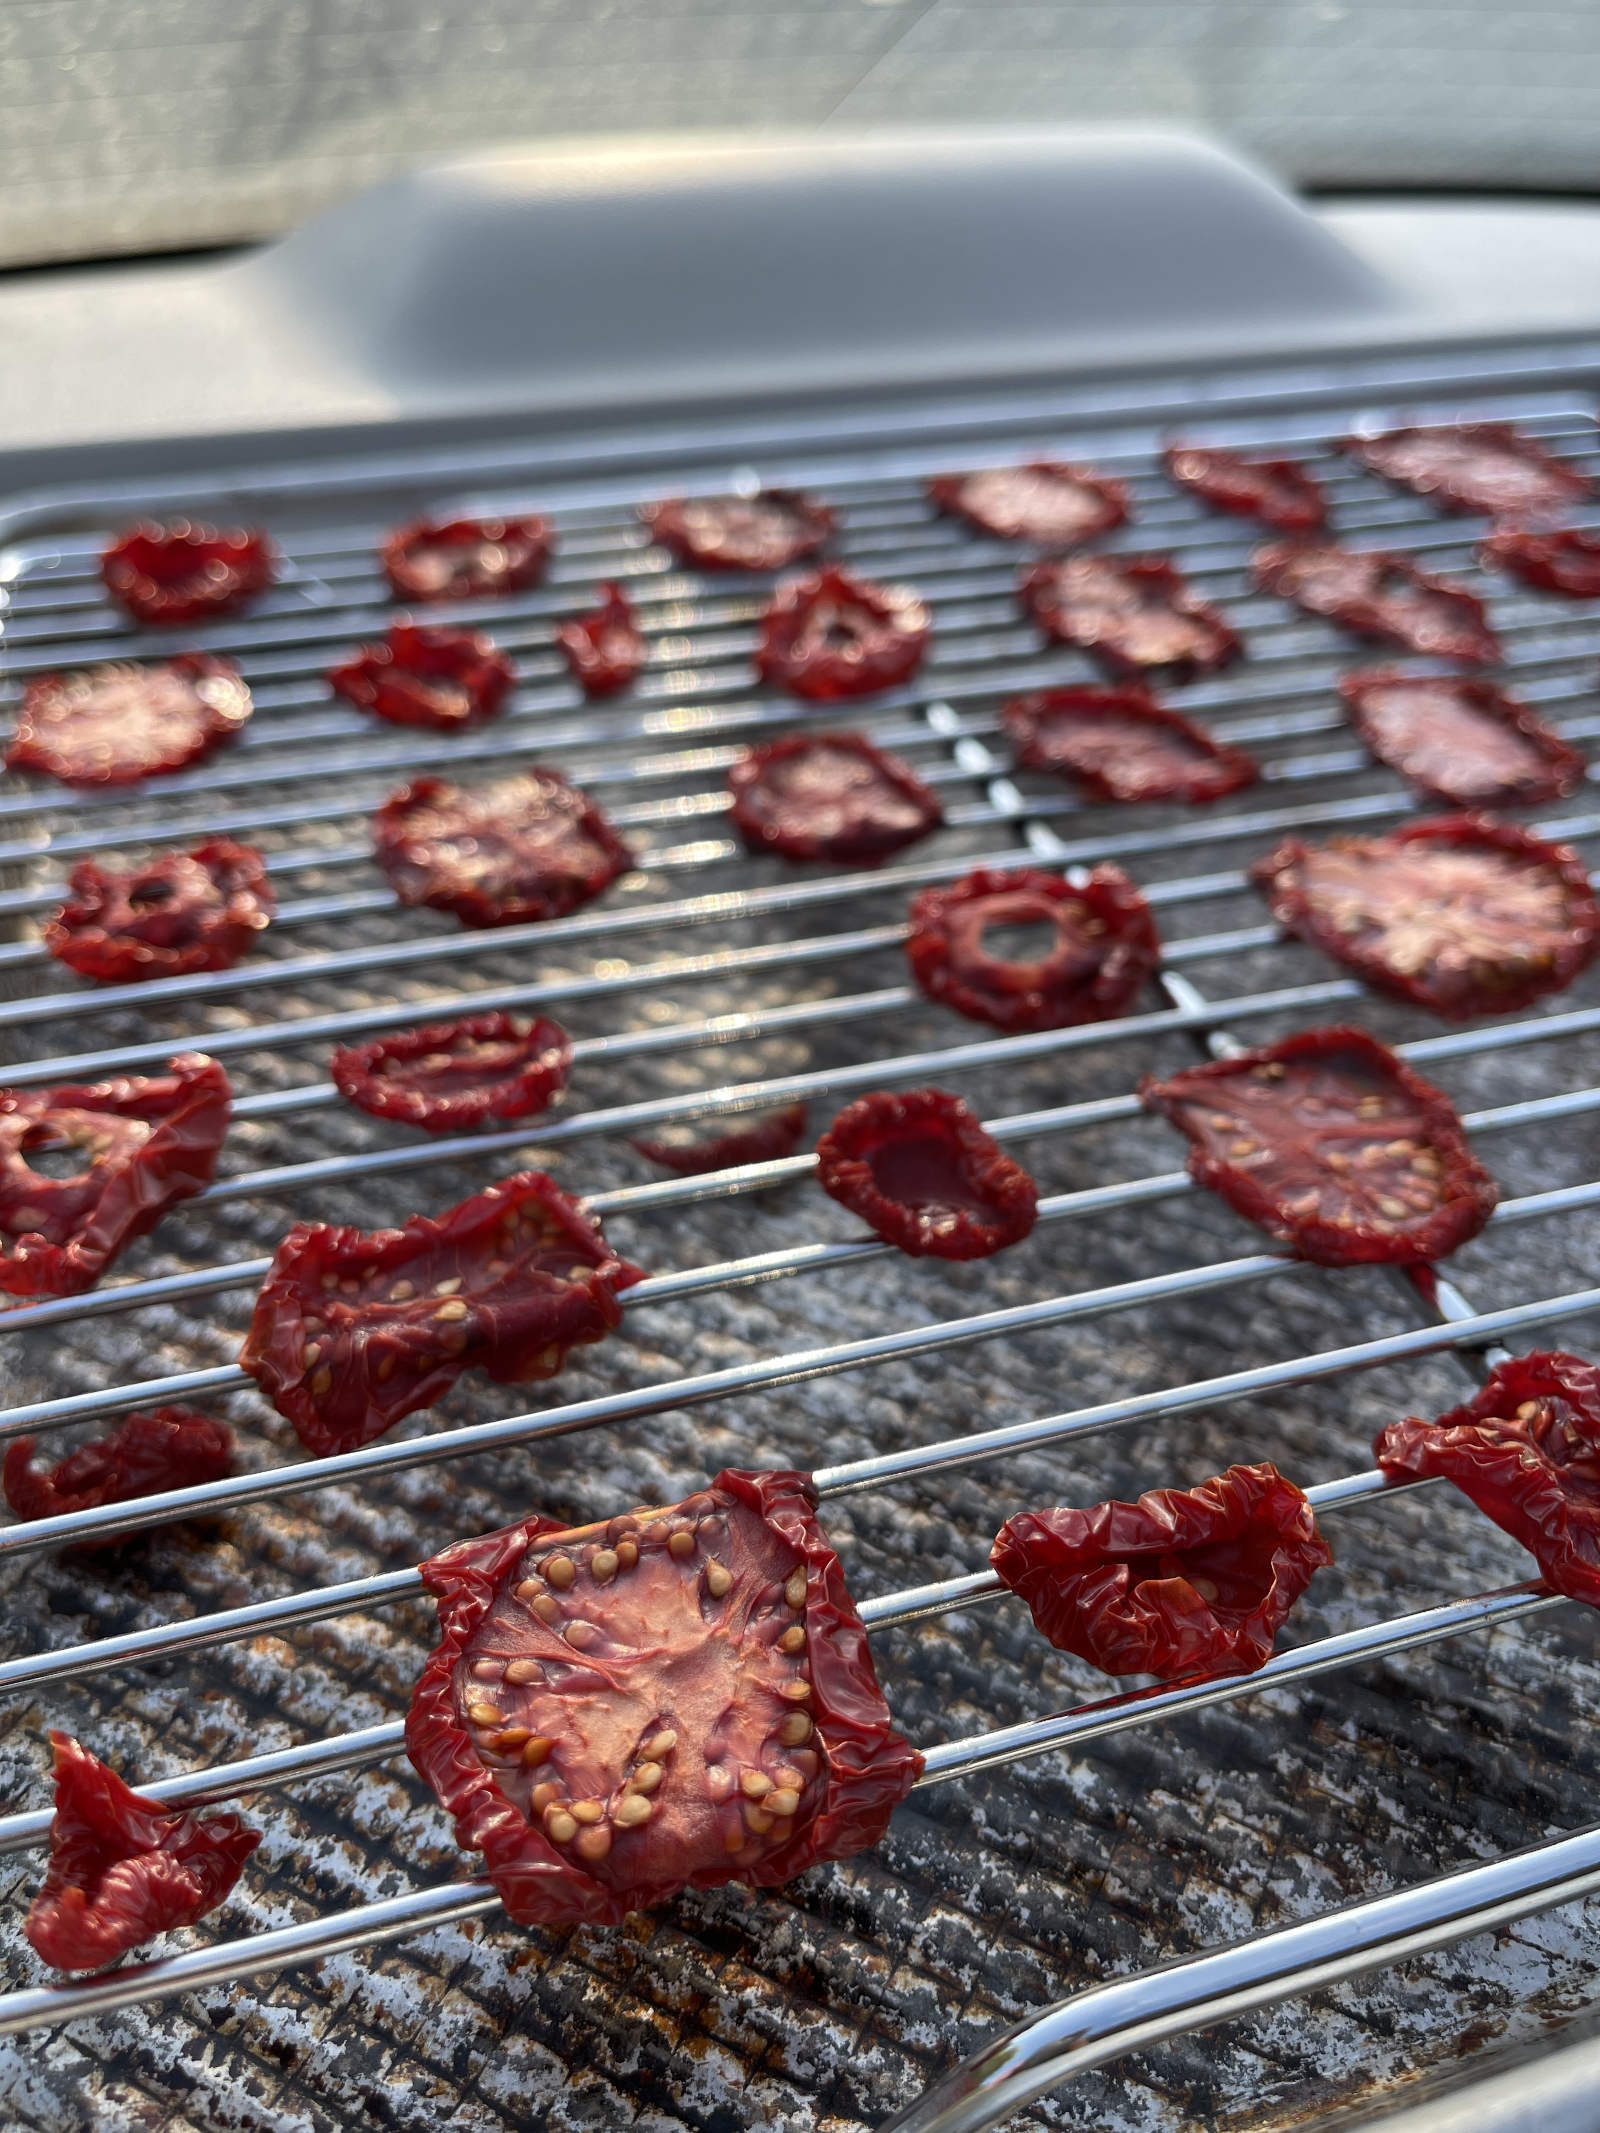 Dehydrated tomato slices sitting under the rear windshield of a car on a hot day. The tomatoes are spread across a rack set in a baking sheet.